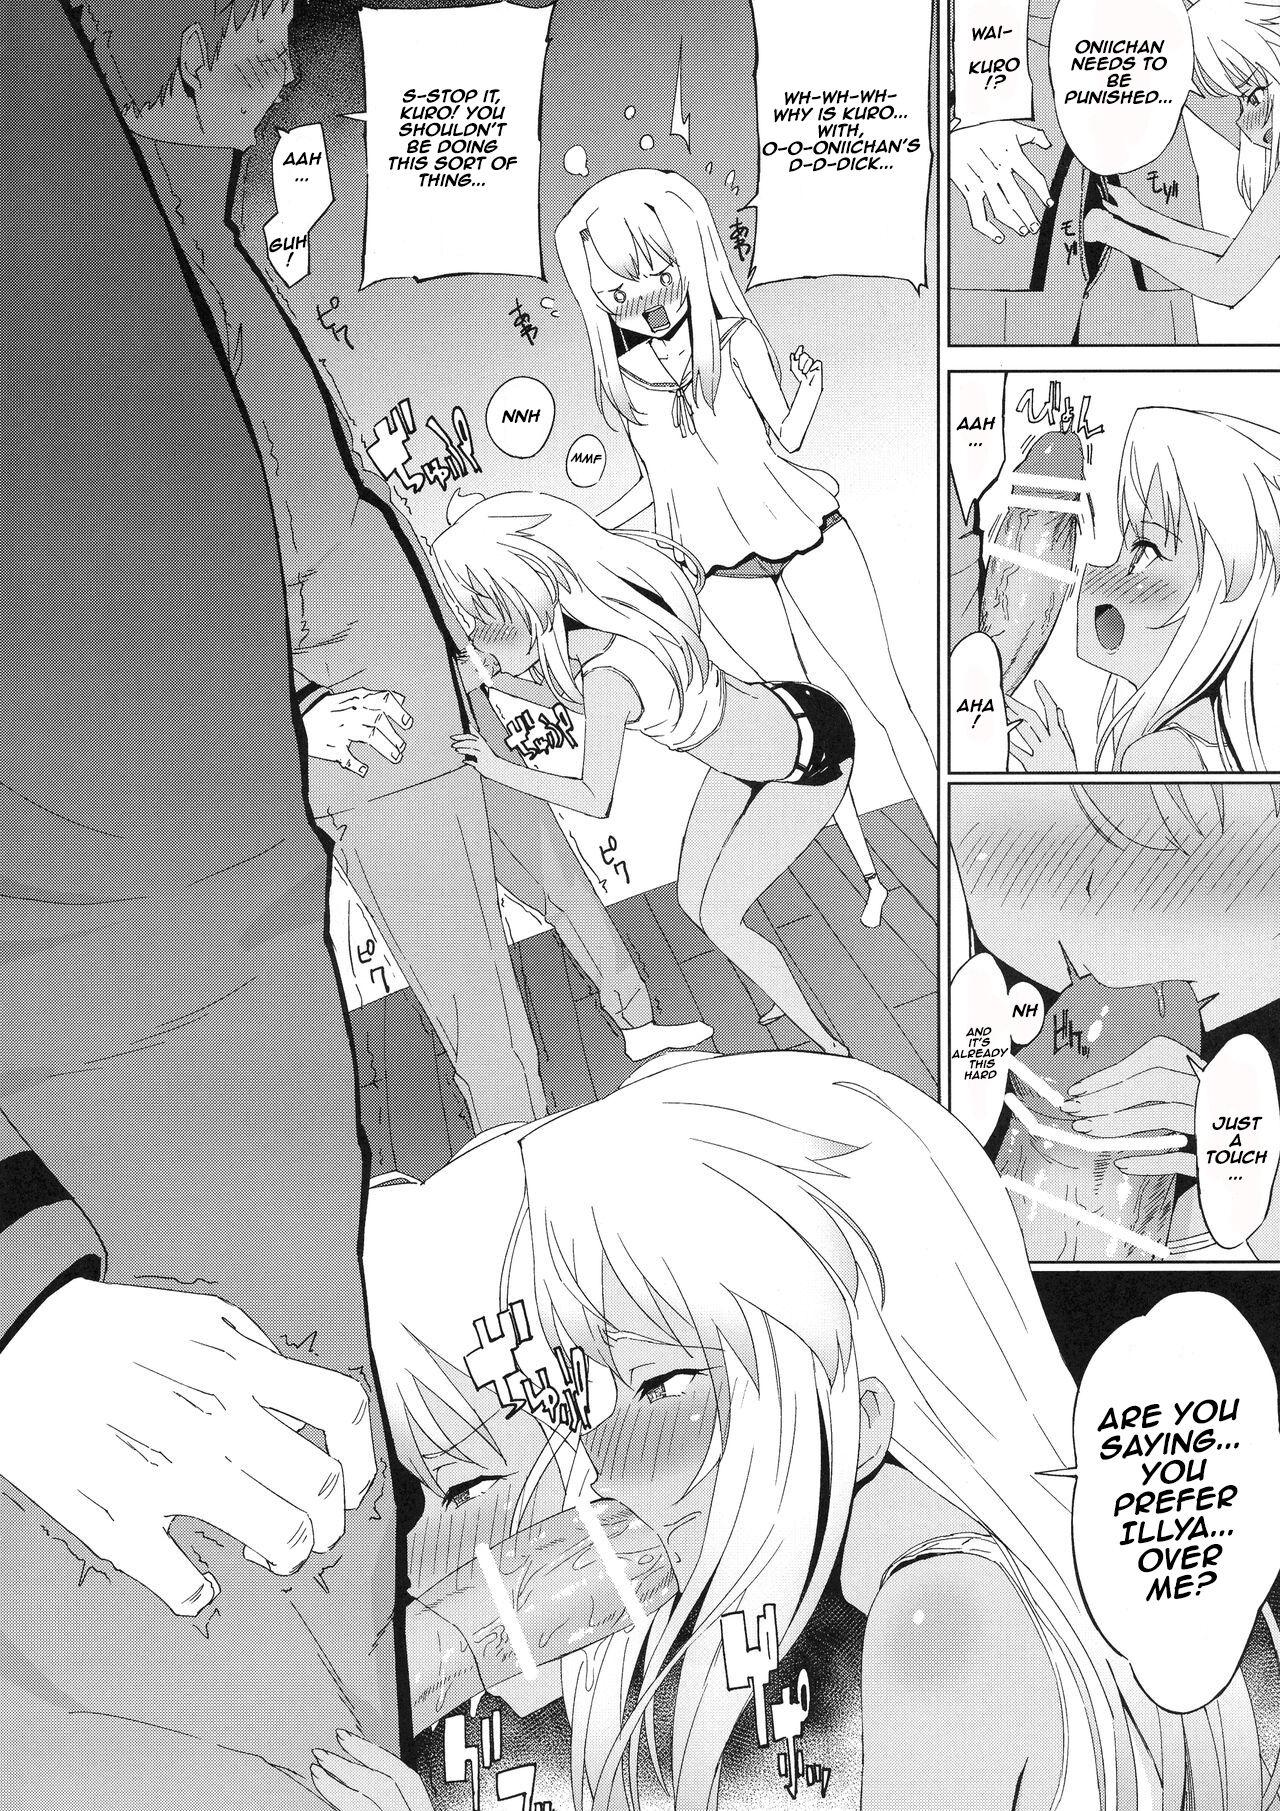 Viet Nam Oshiete Onii-chan - Fate kaleid liner prisma illya Perfect Butt - Page 4